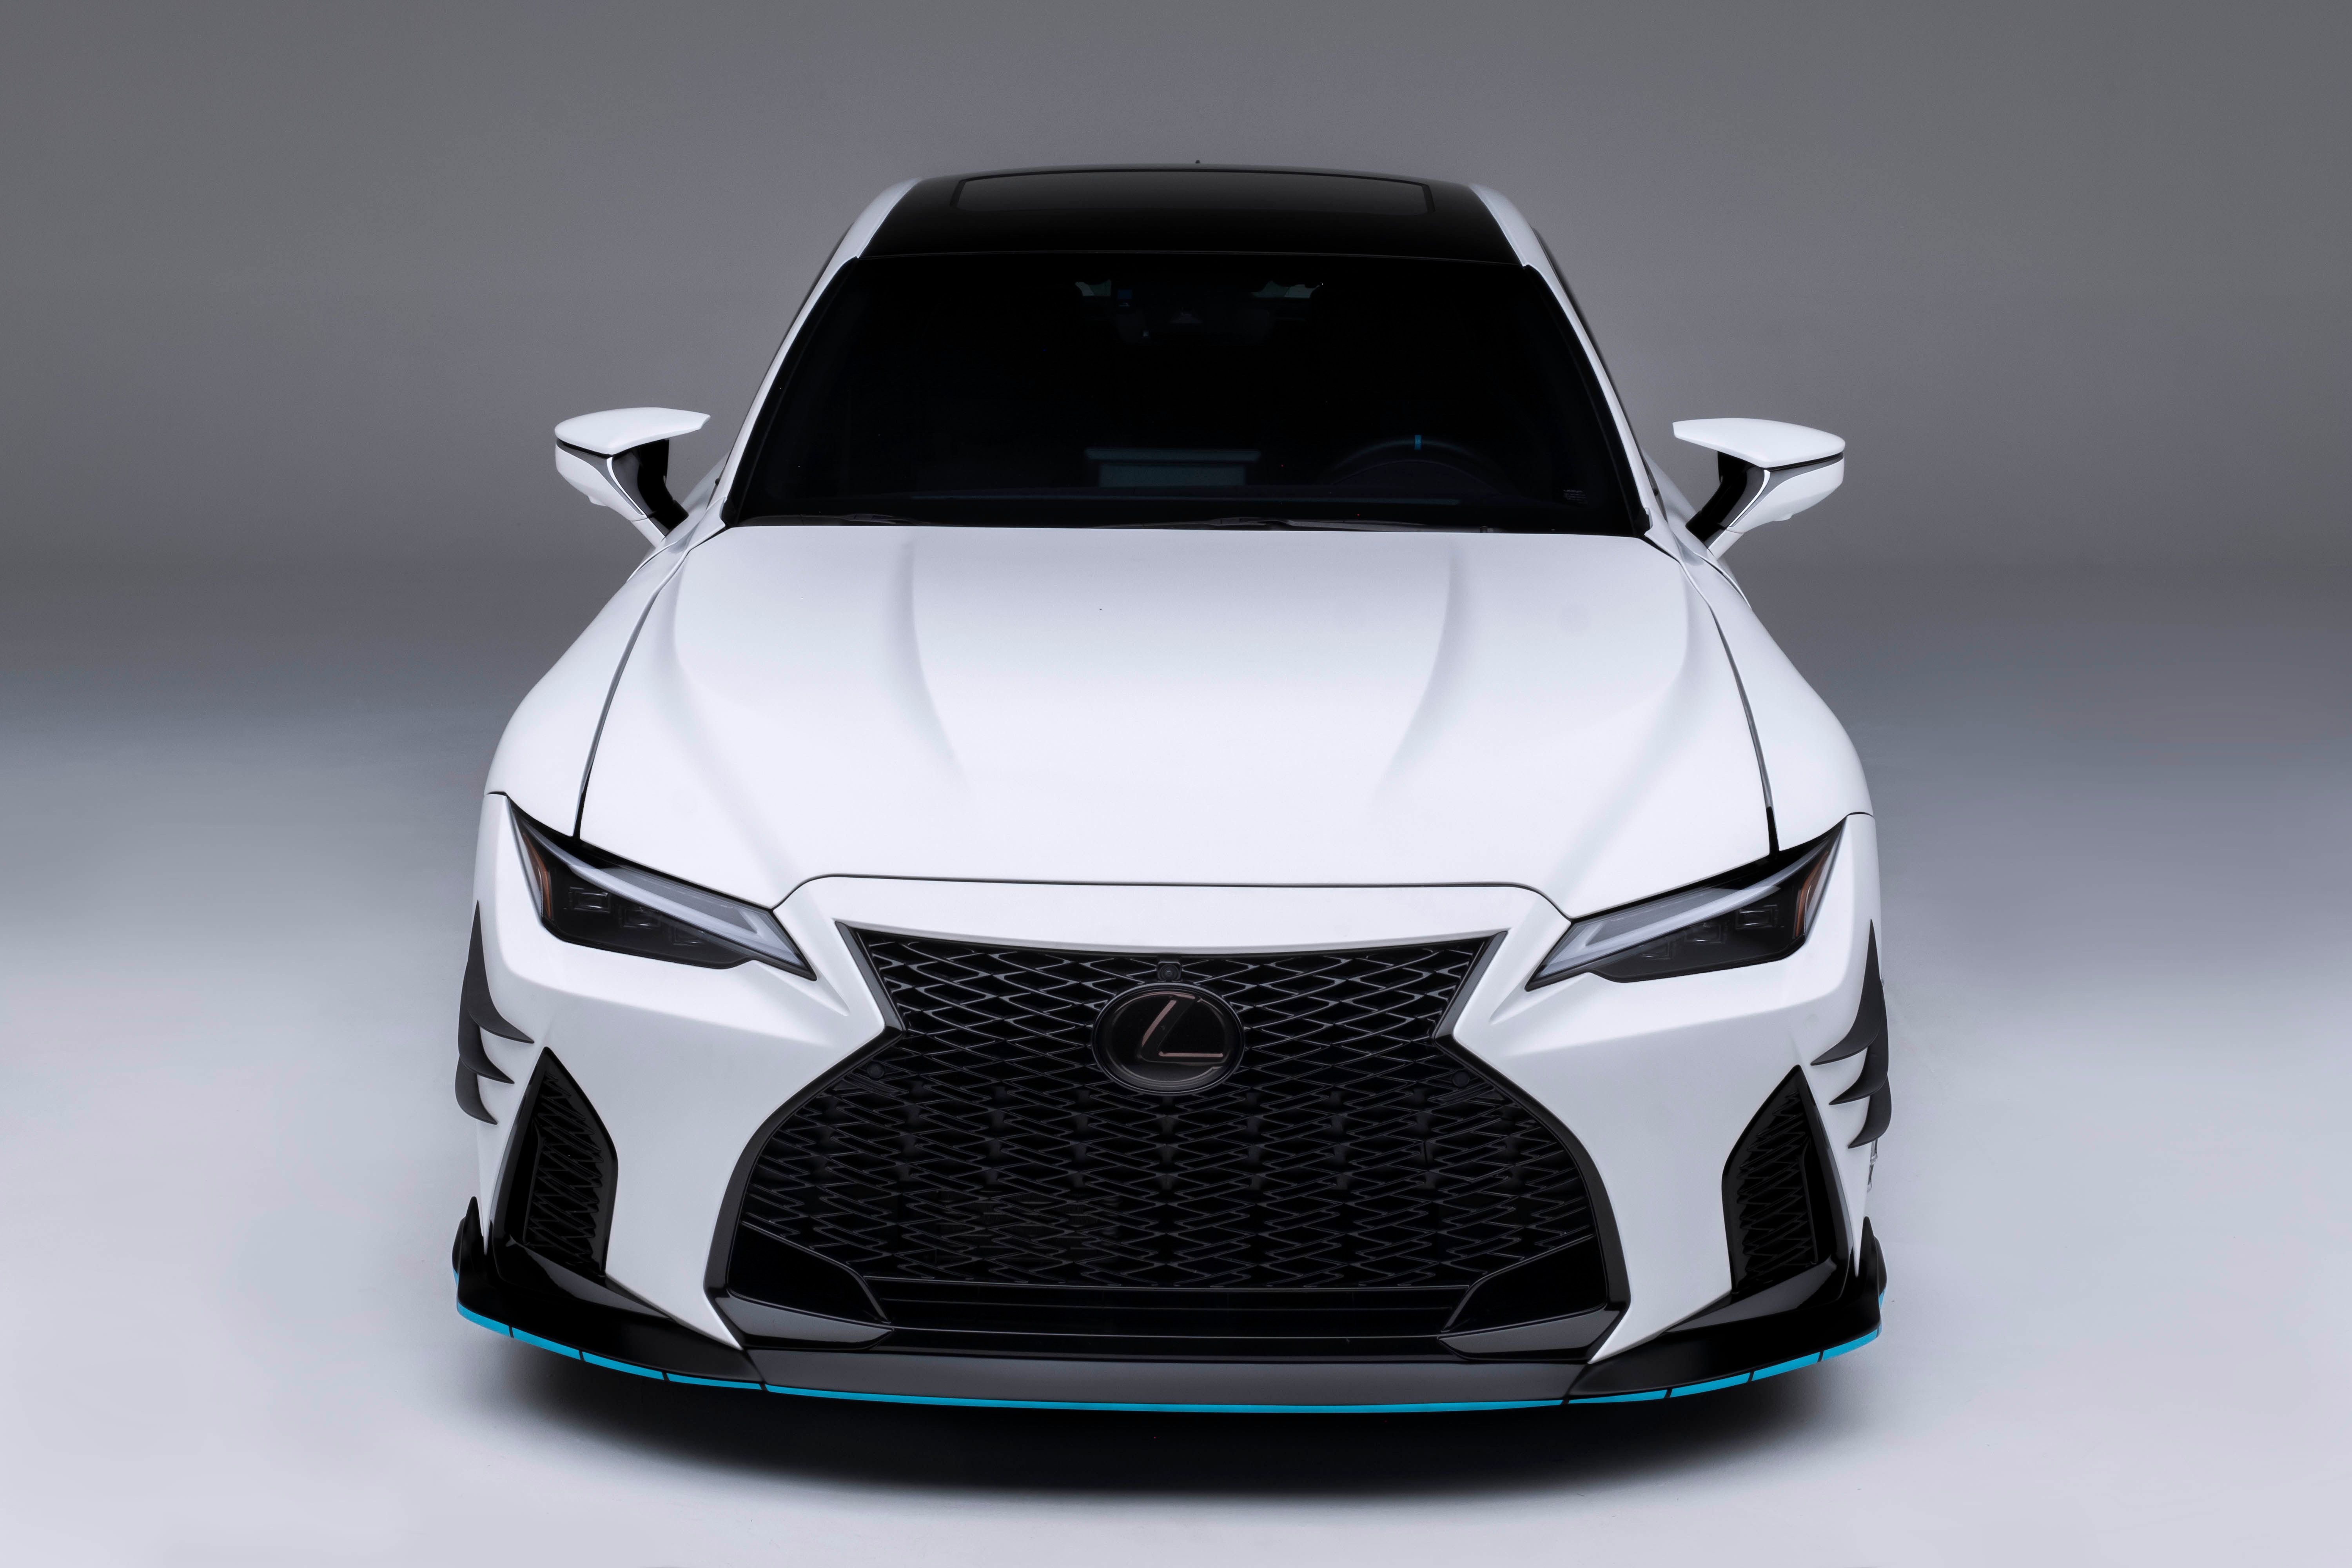 2021 Lexus IS 500 By Hiraku And Townsend Bell